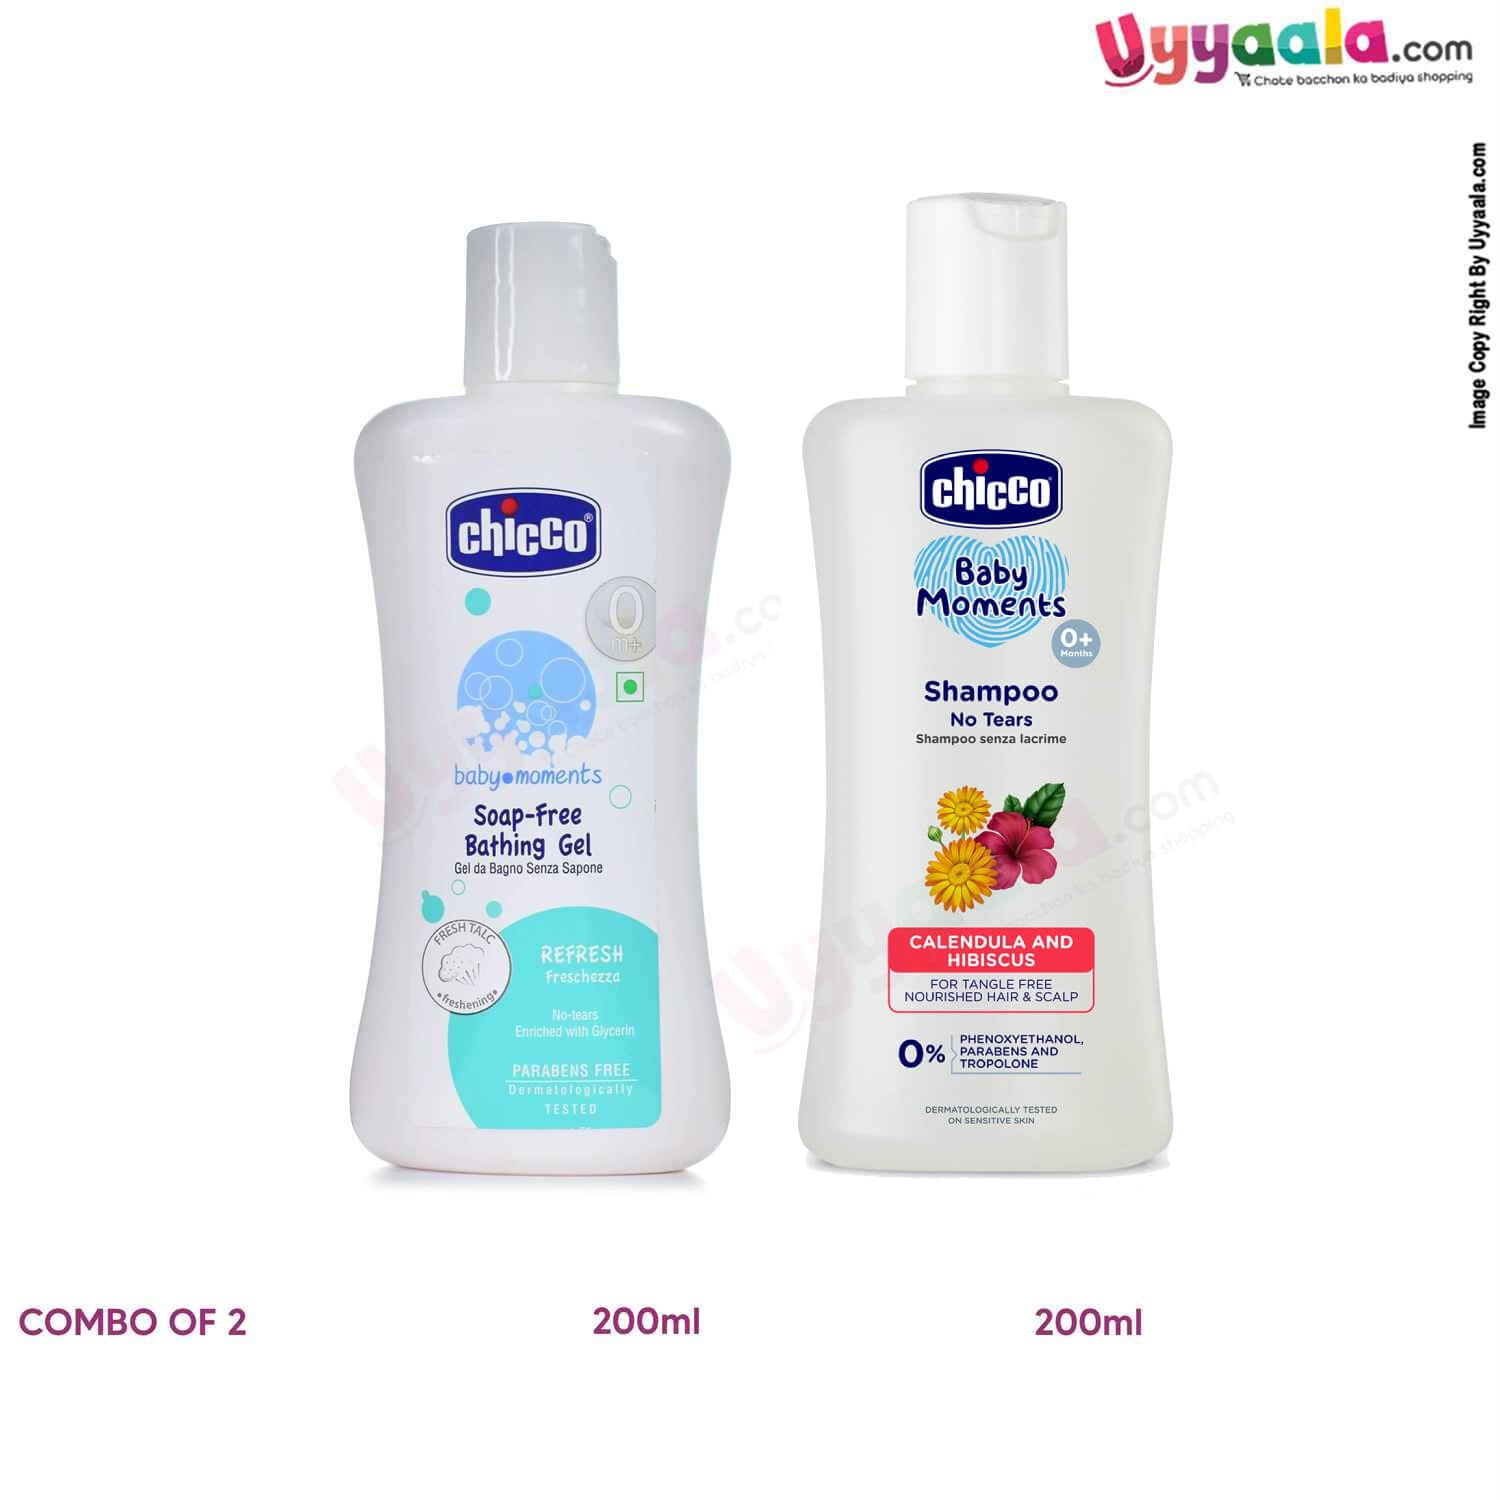 CHICCO Baby moments combo pack (soap free bathing gel  &  no tears shampoo - 200ml each)